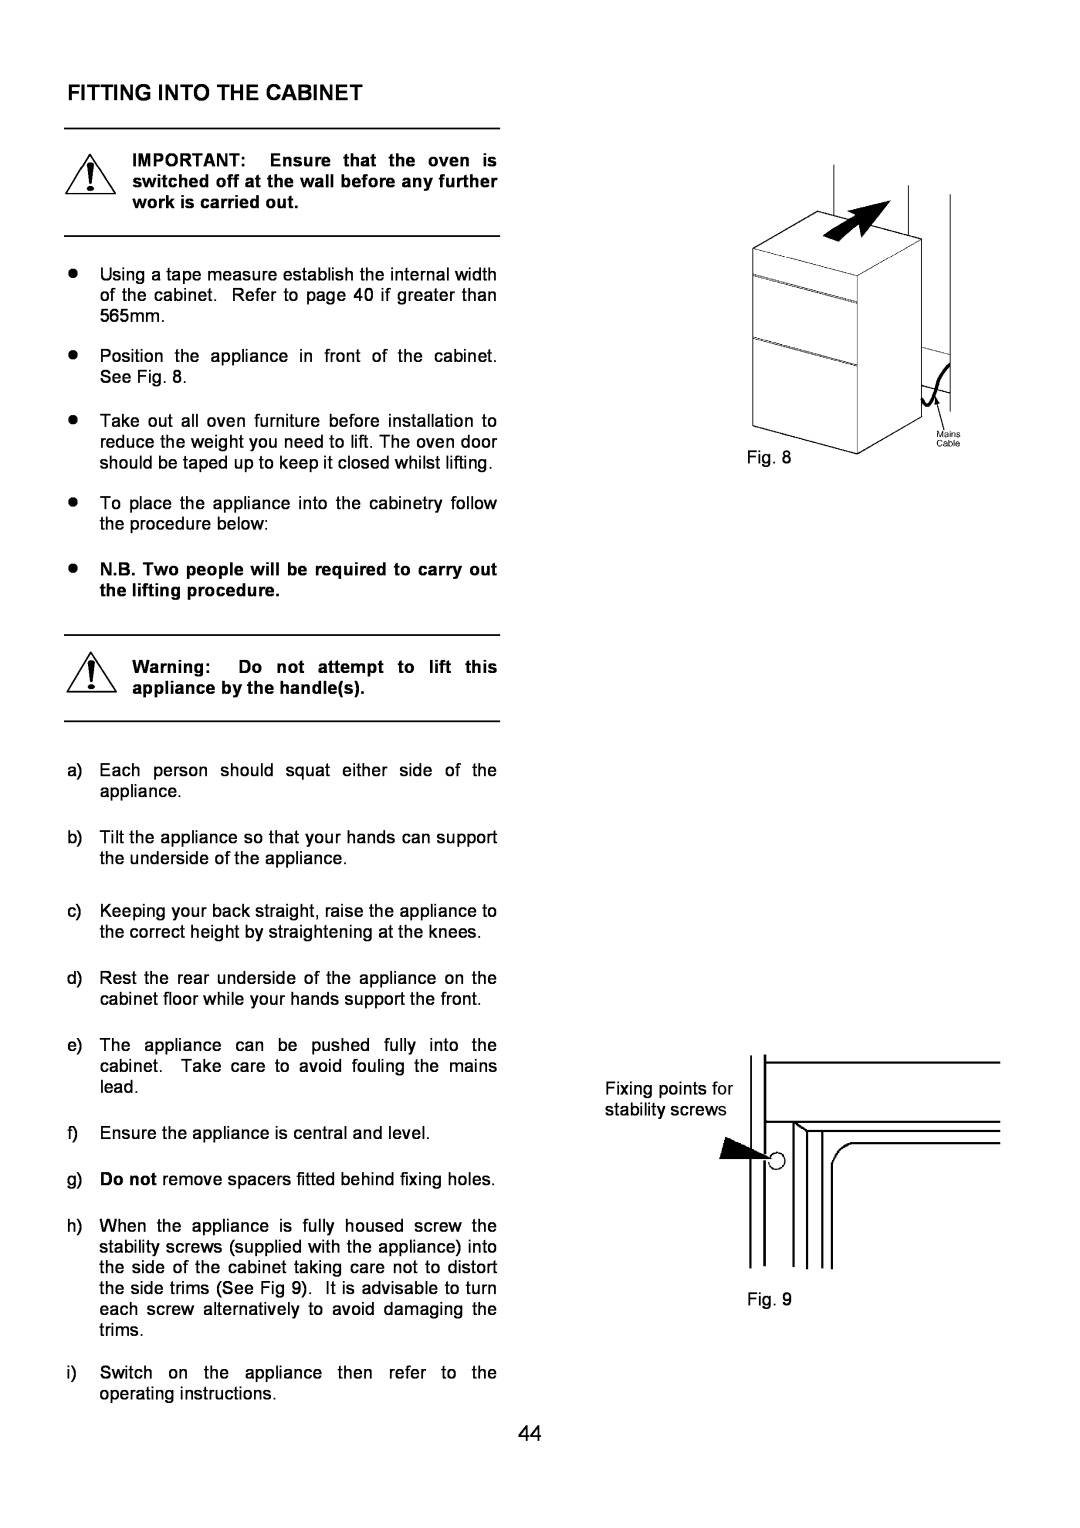 Electrolux D4101-4 operating instructions Fitting Into The Cabinet 